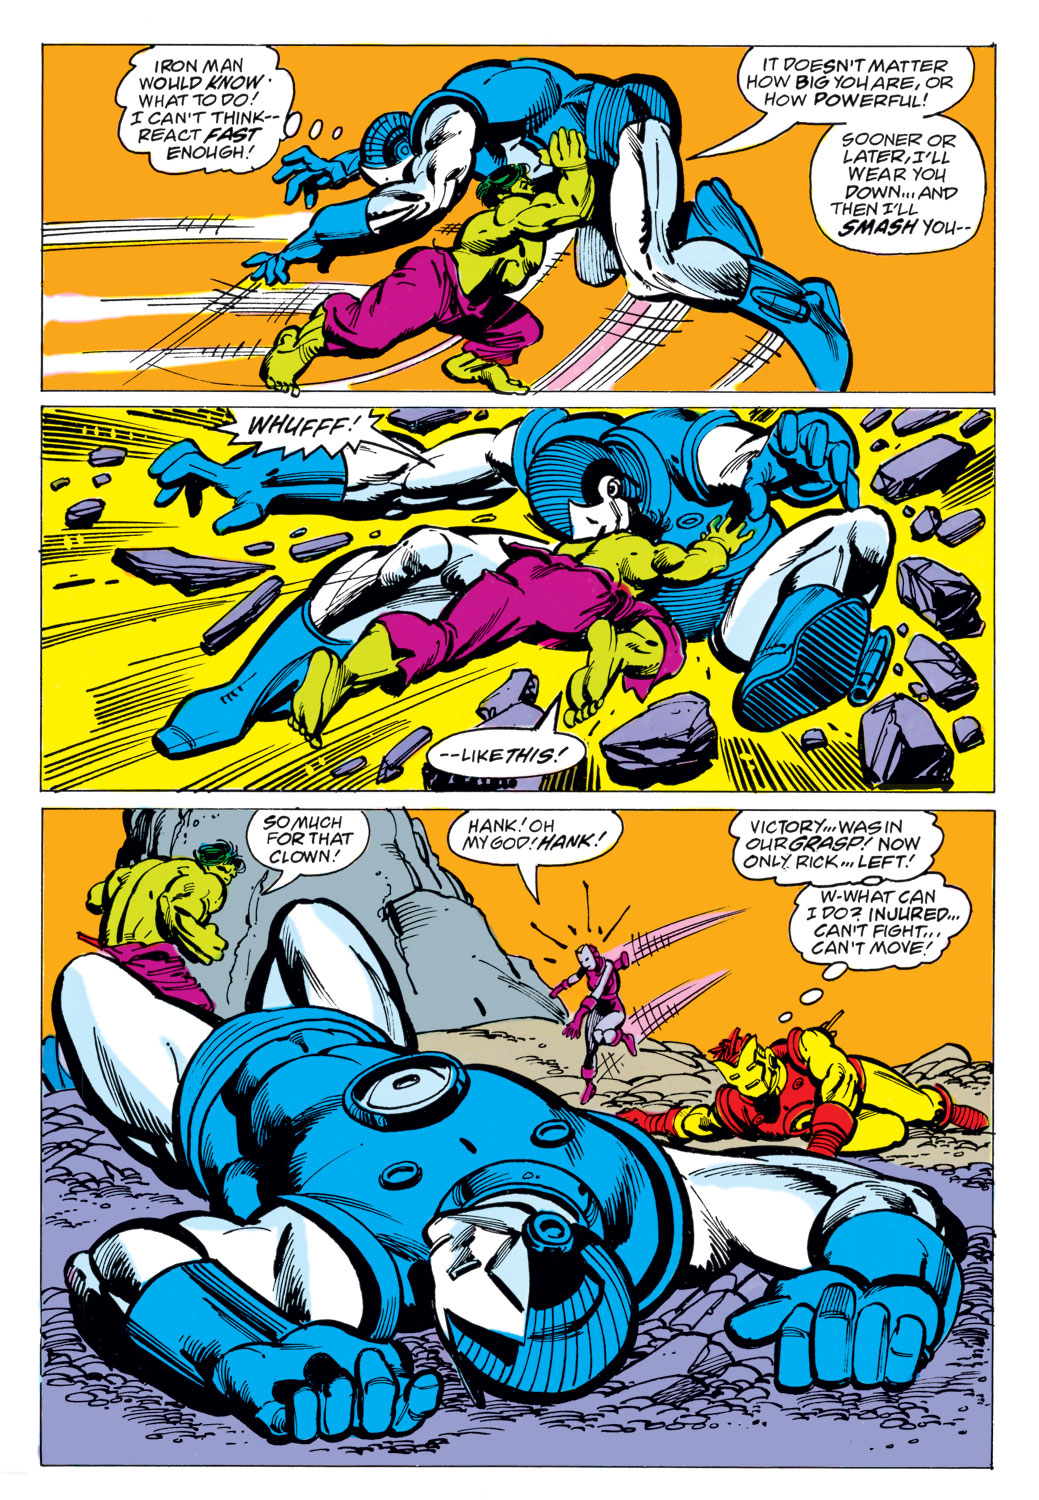 What If? (1977) issue 3 - The Avengers had never been - Page 29